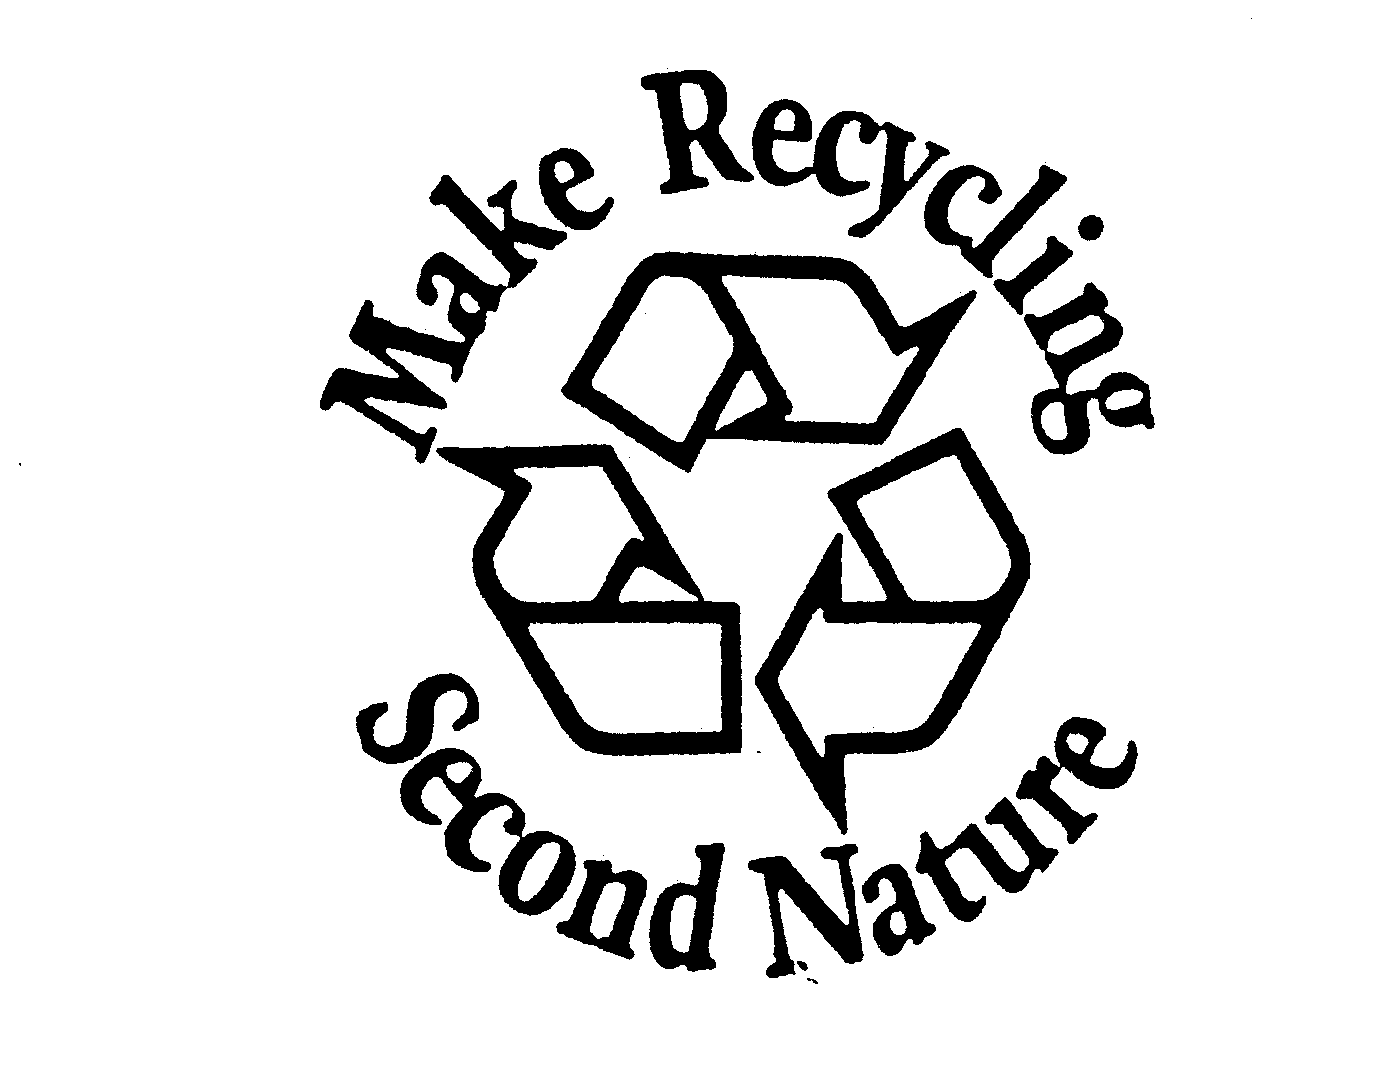  MAKE RECYCLING SECOND NATURE